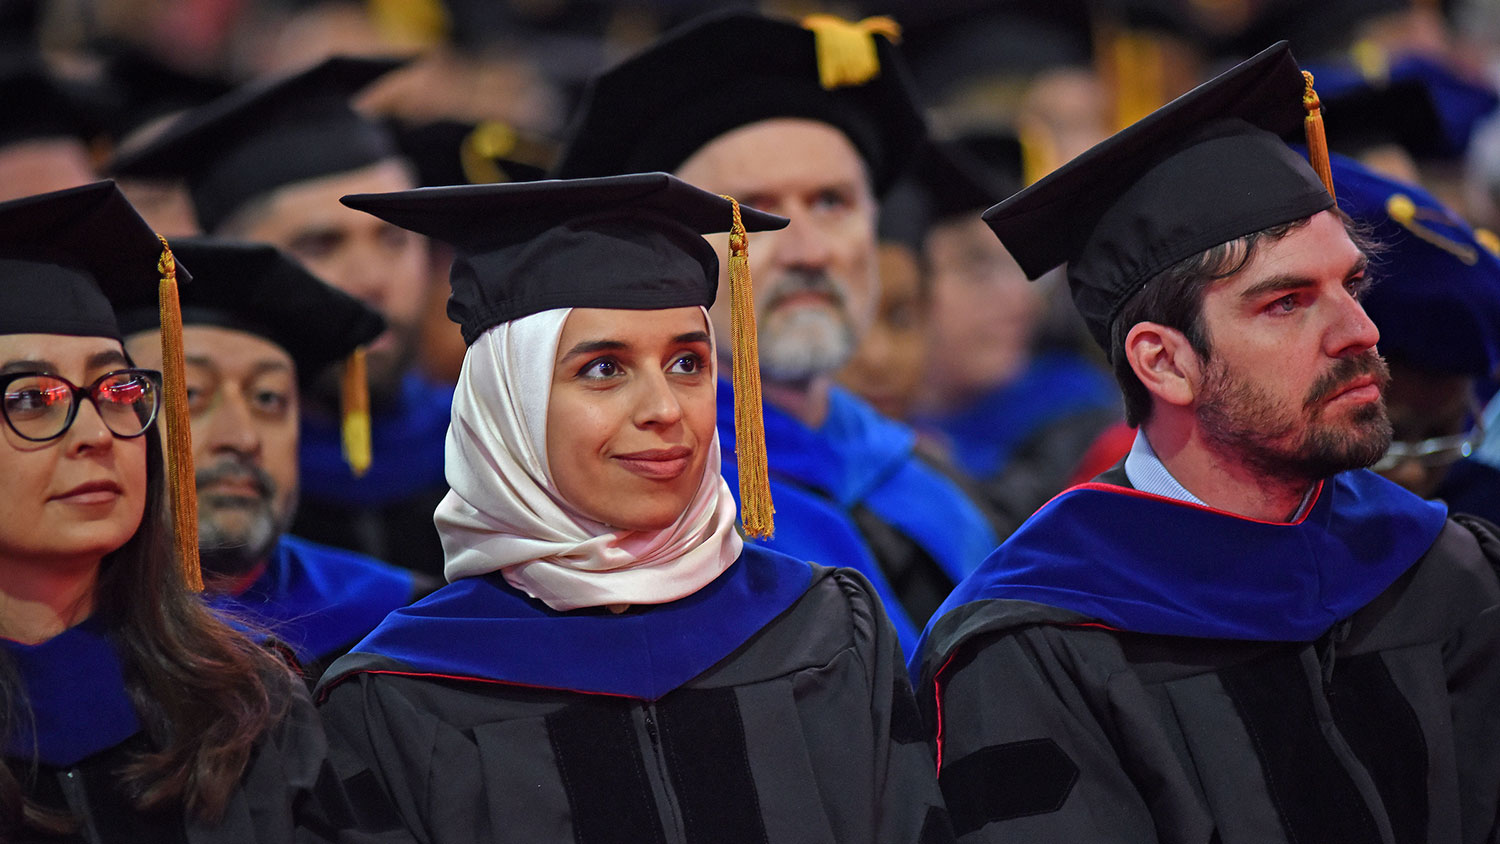 Graduate students at spring 2019 commencement